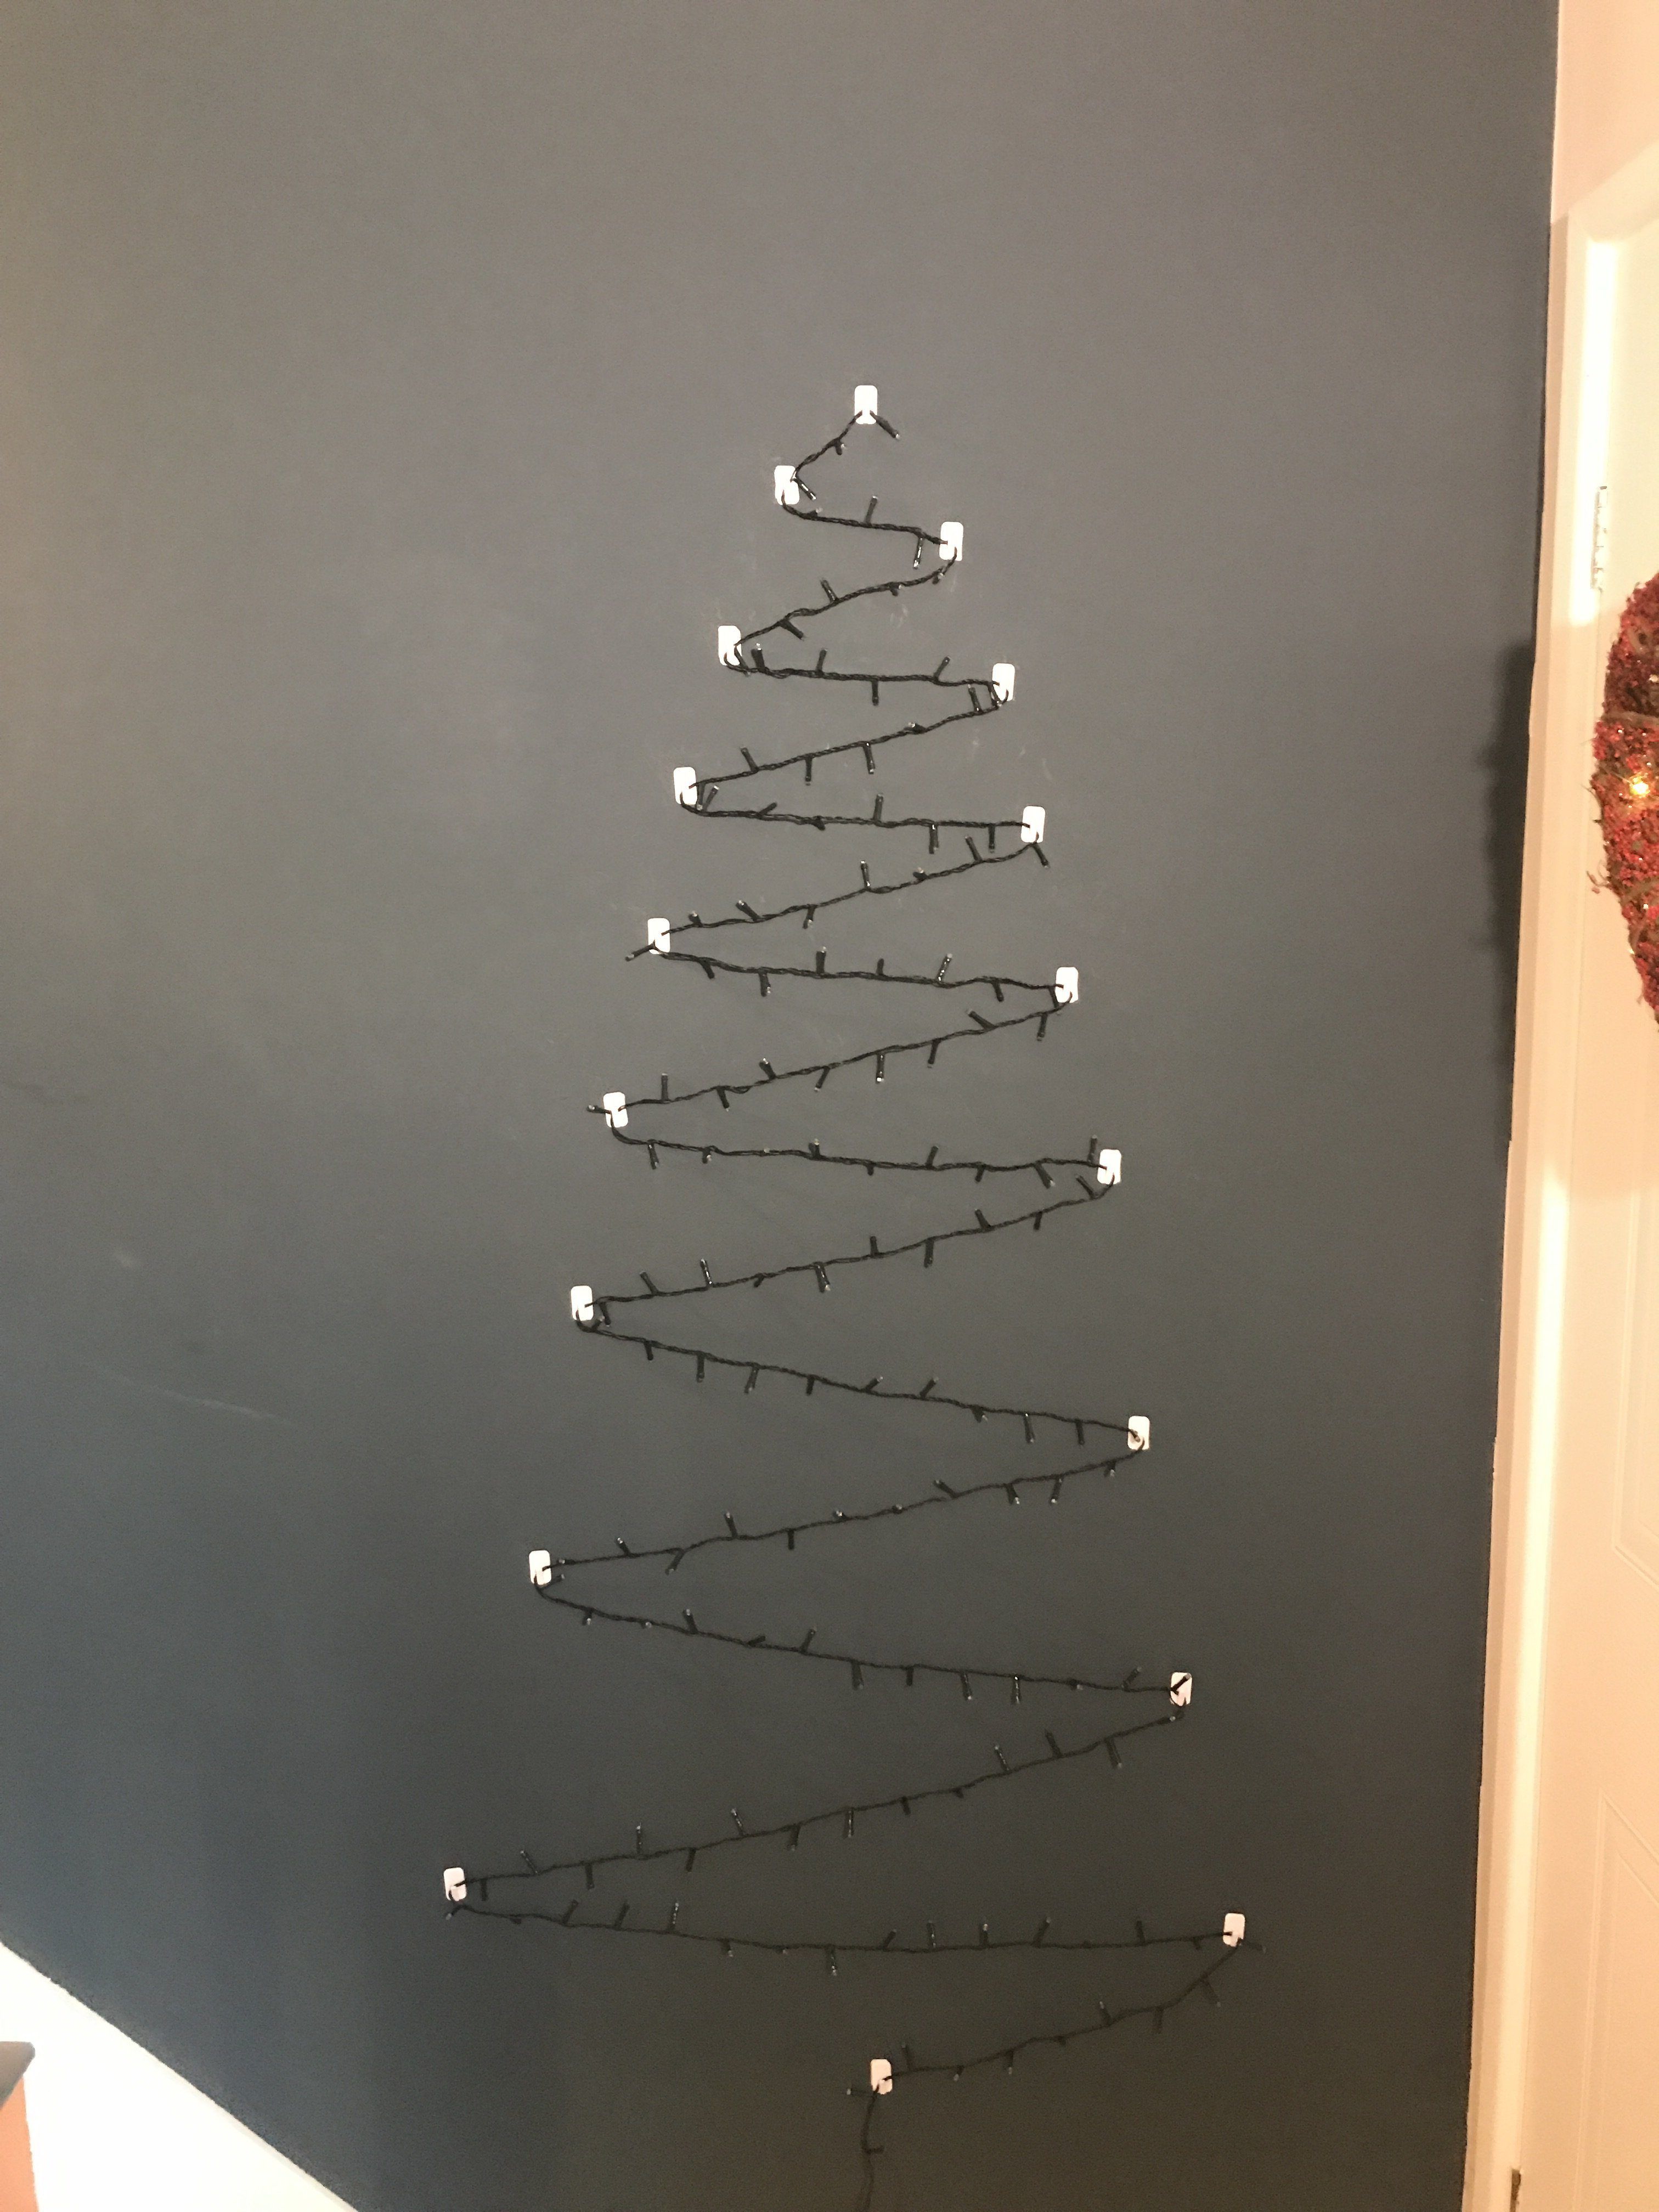 Mislukking galop Chirurgie Make a DIY Christmas Tree for Your Wall | VELCRO® Brand Blog